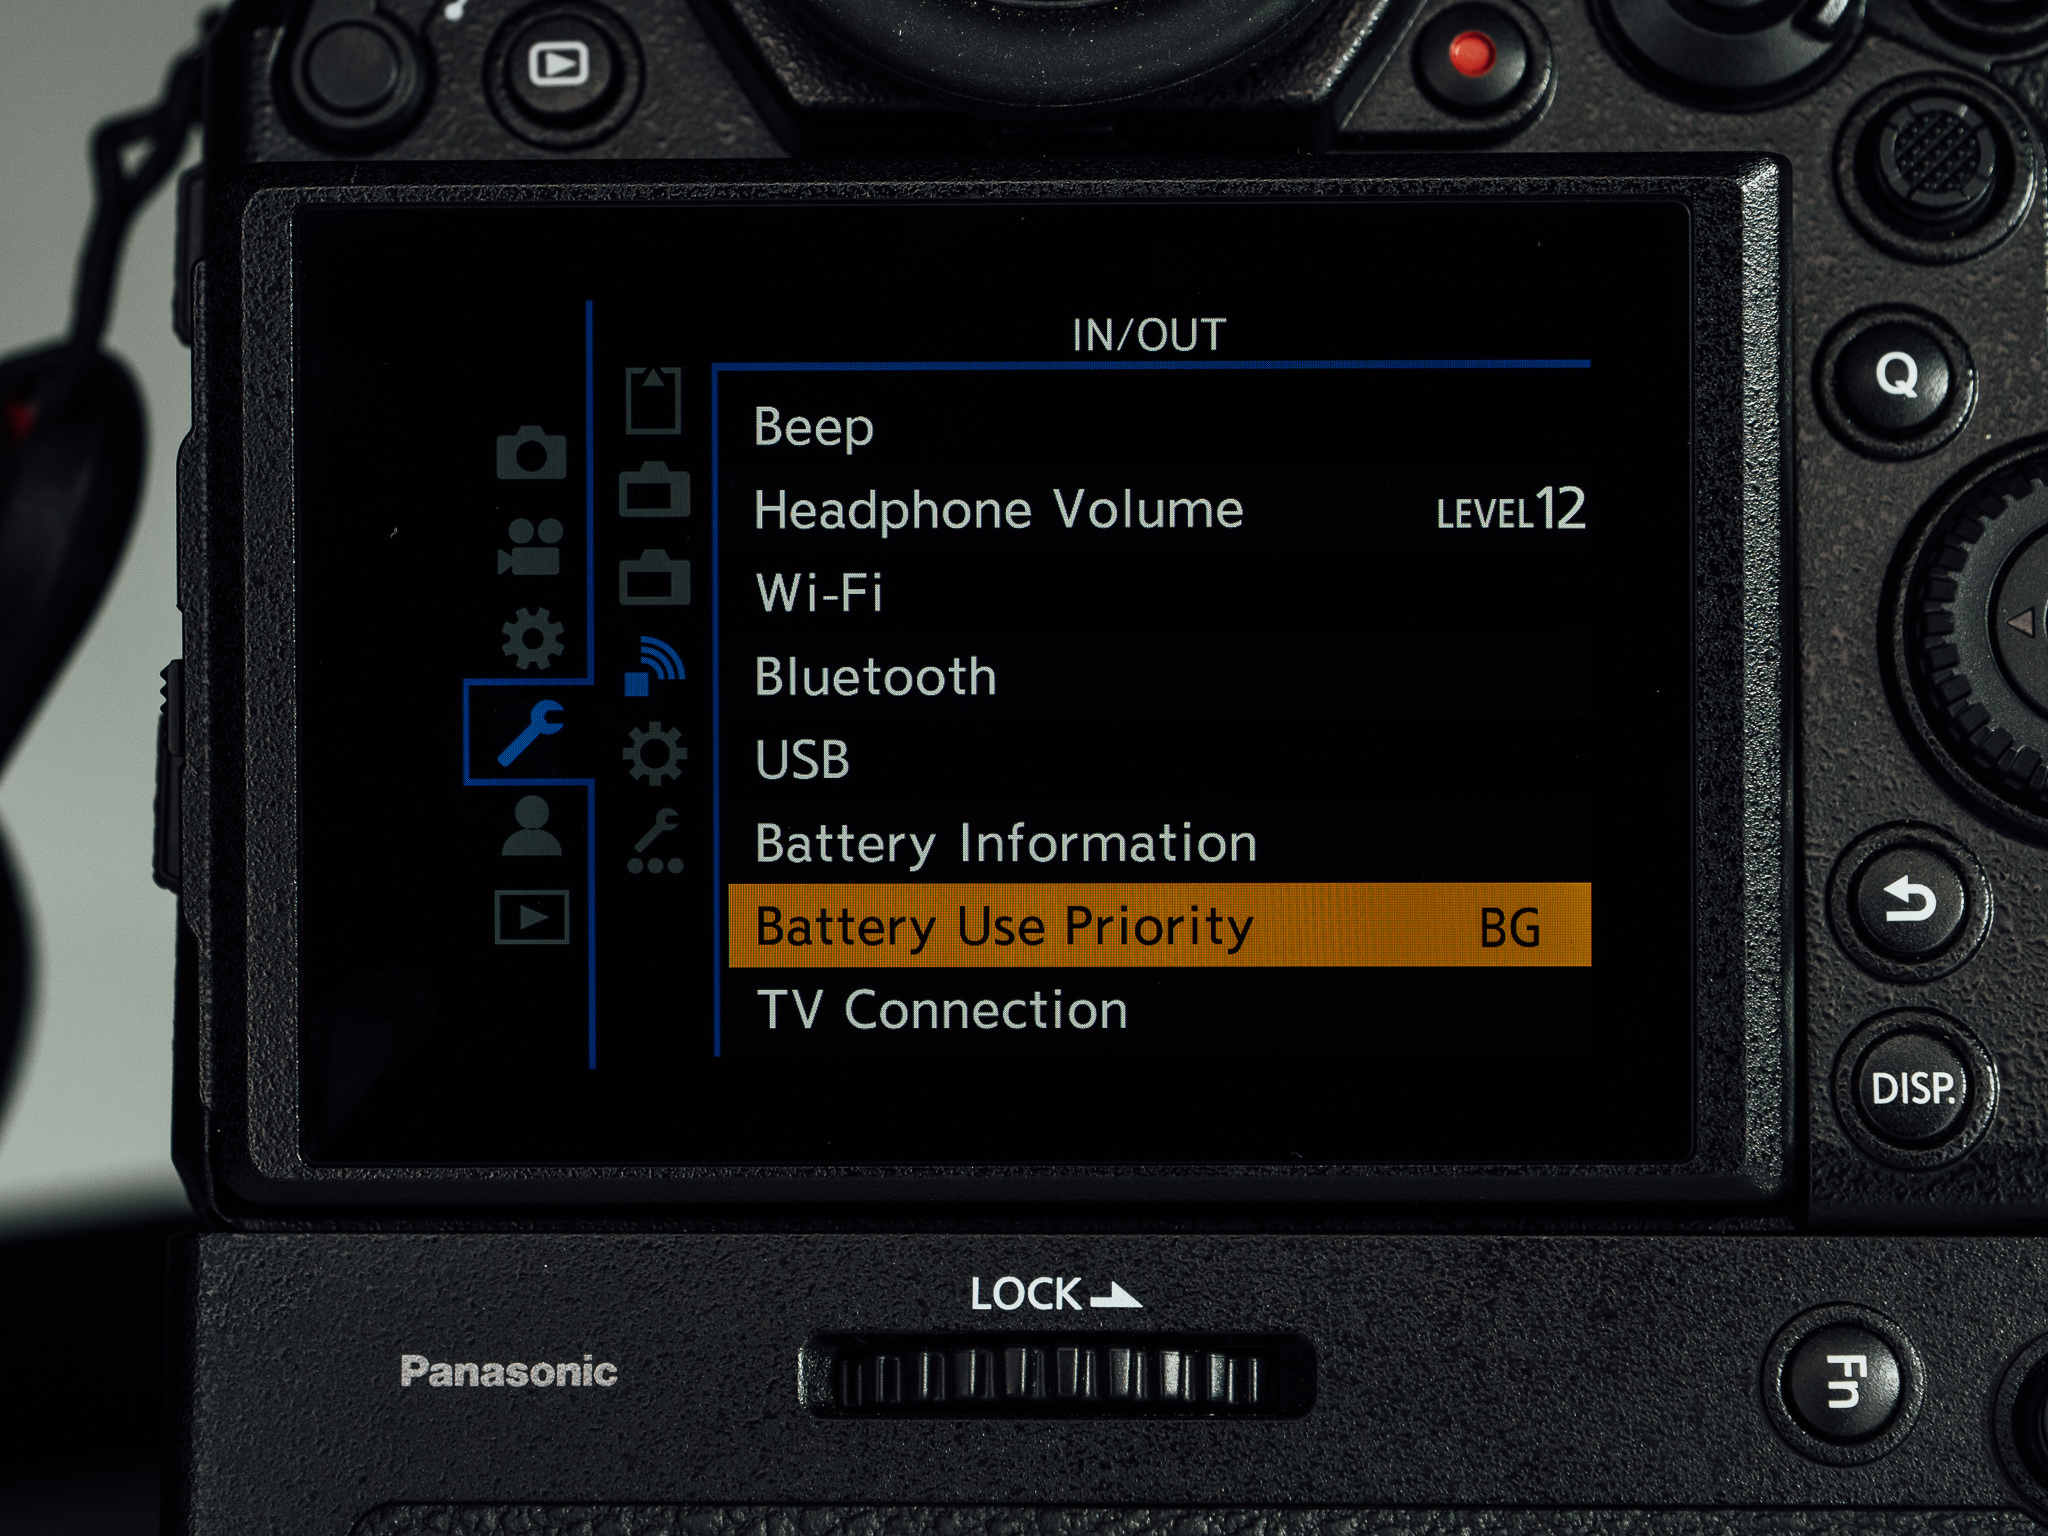 Wrench (setup menu) > IN/OUT > Battery Use Priority on the LUMIX S1 and S1R